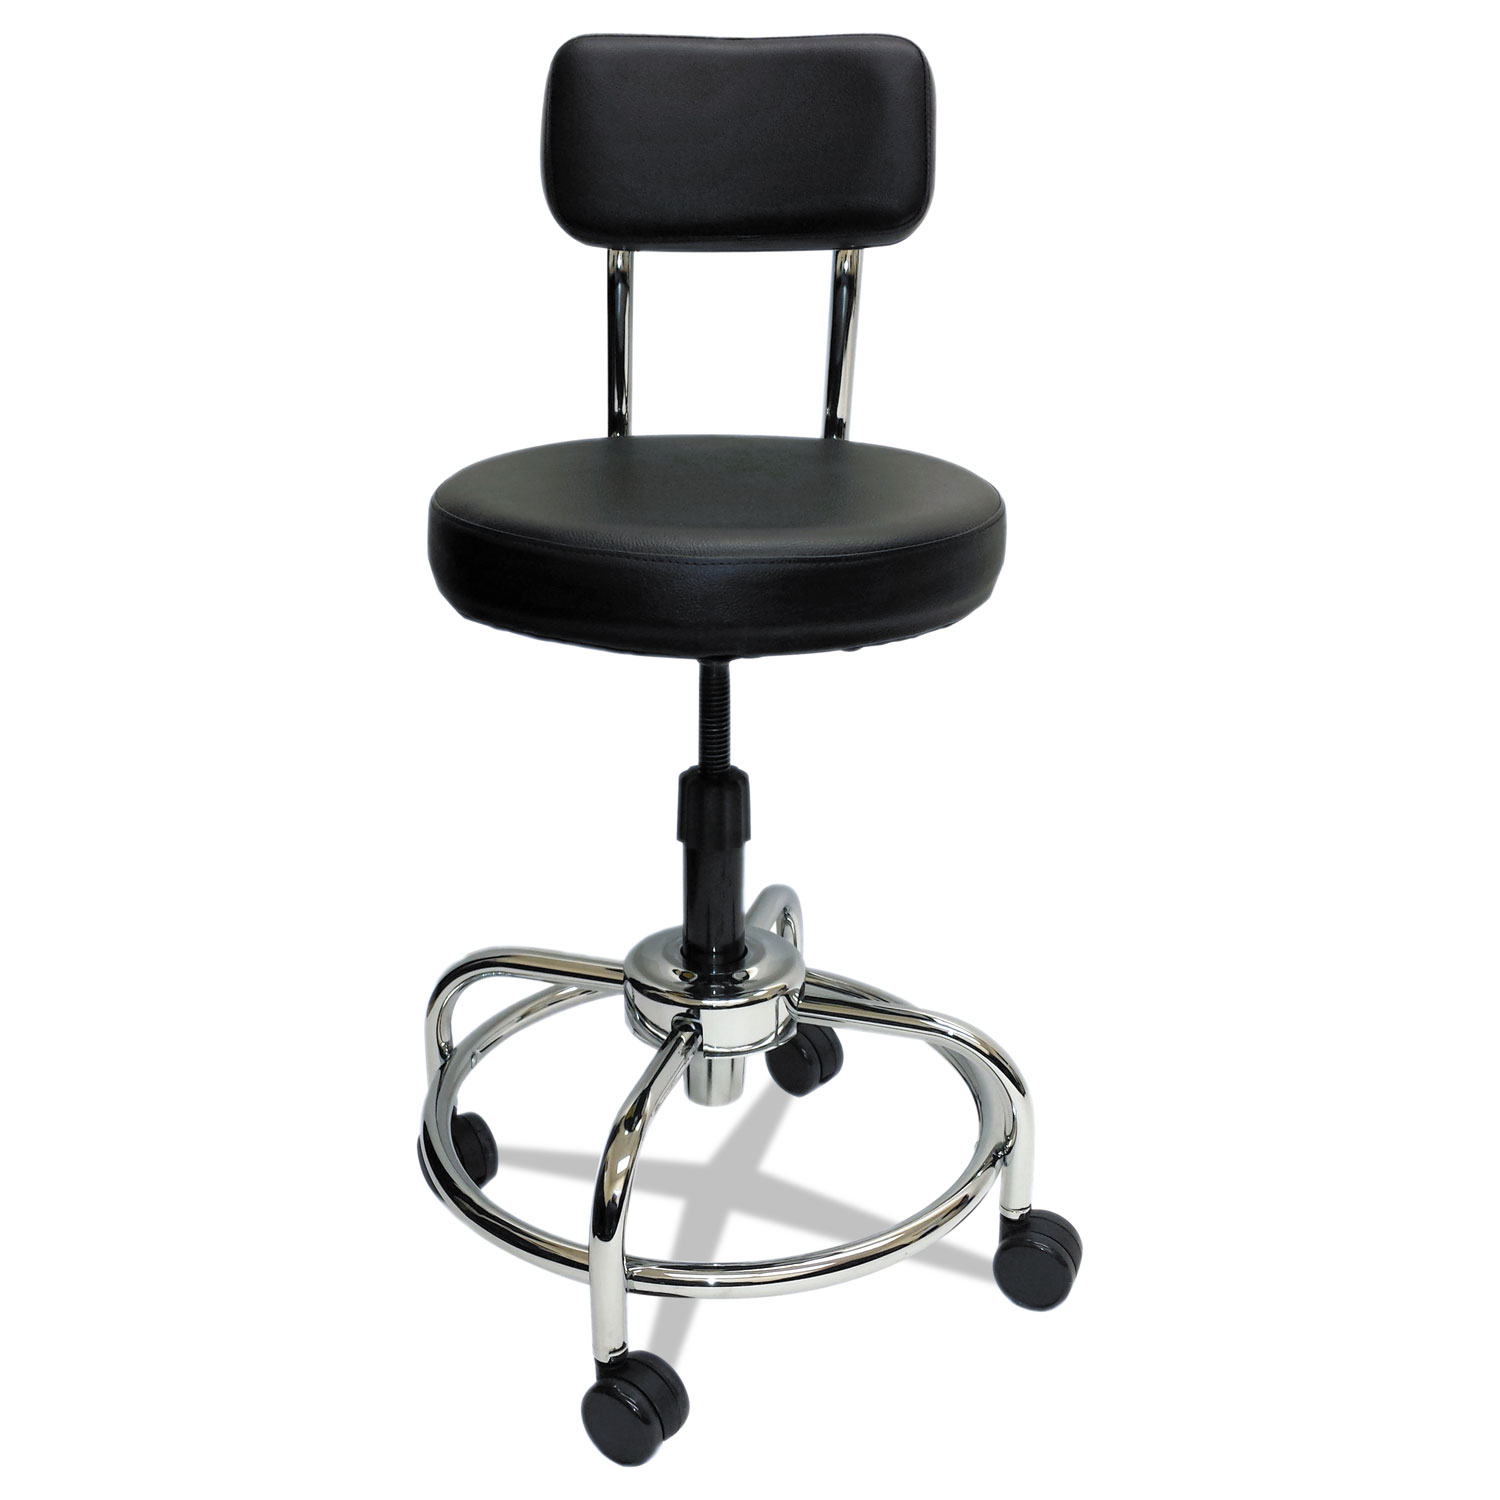  ShopSol 3010011 Lab and Healthcare Stool, 27 Seat Height, Supports up to 300 lbs., Black Seat/Black Back, Chrome Base (SSX3010011) 